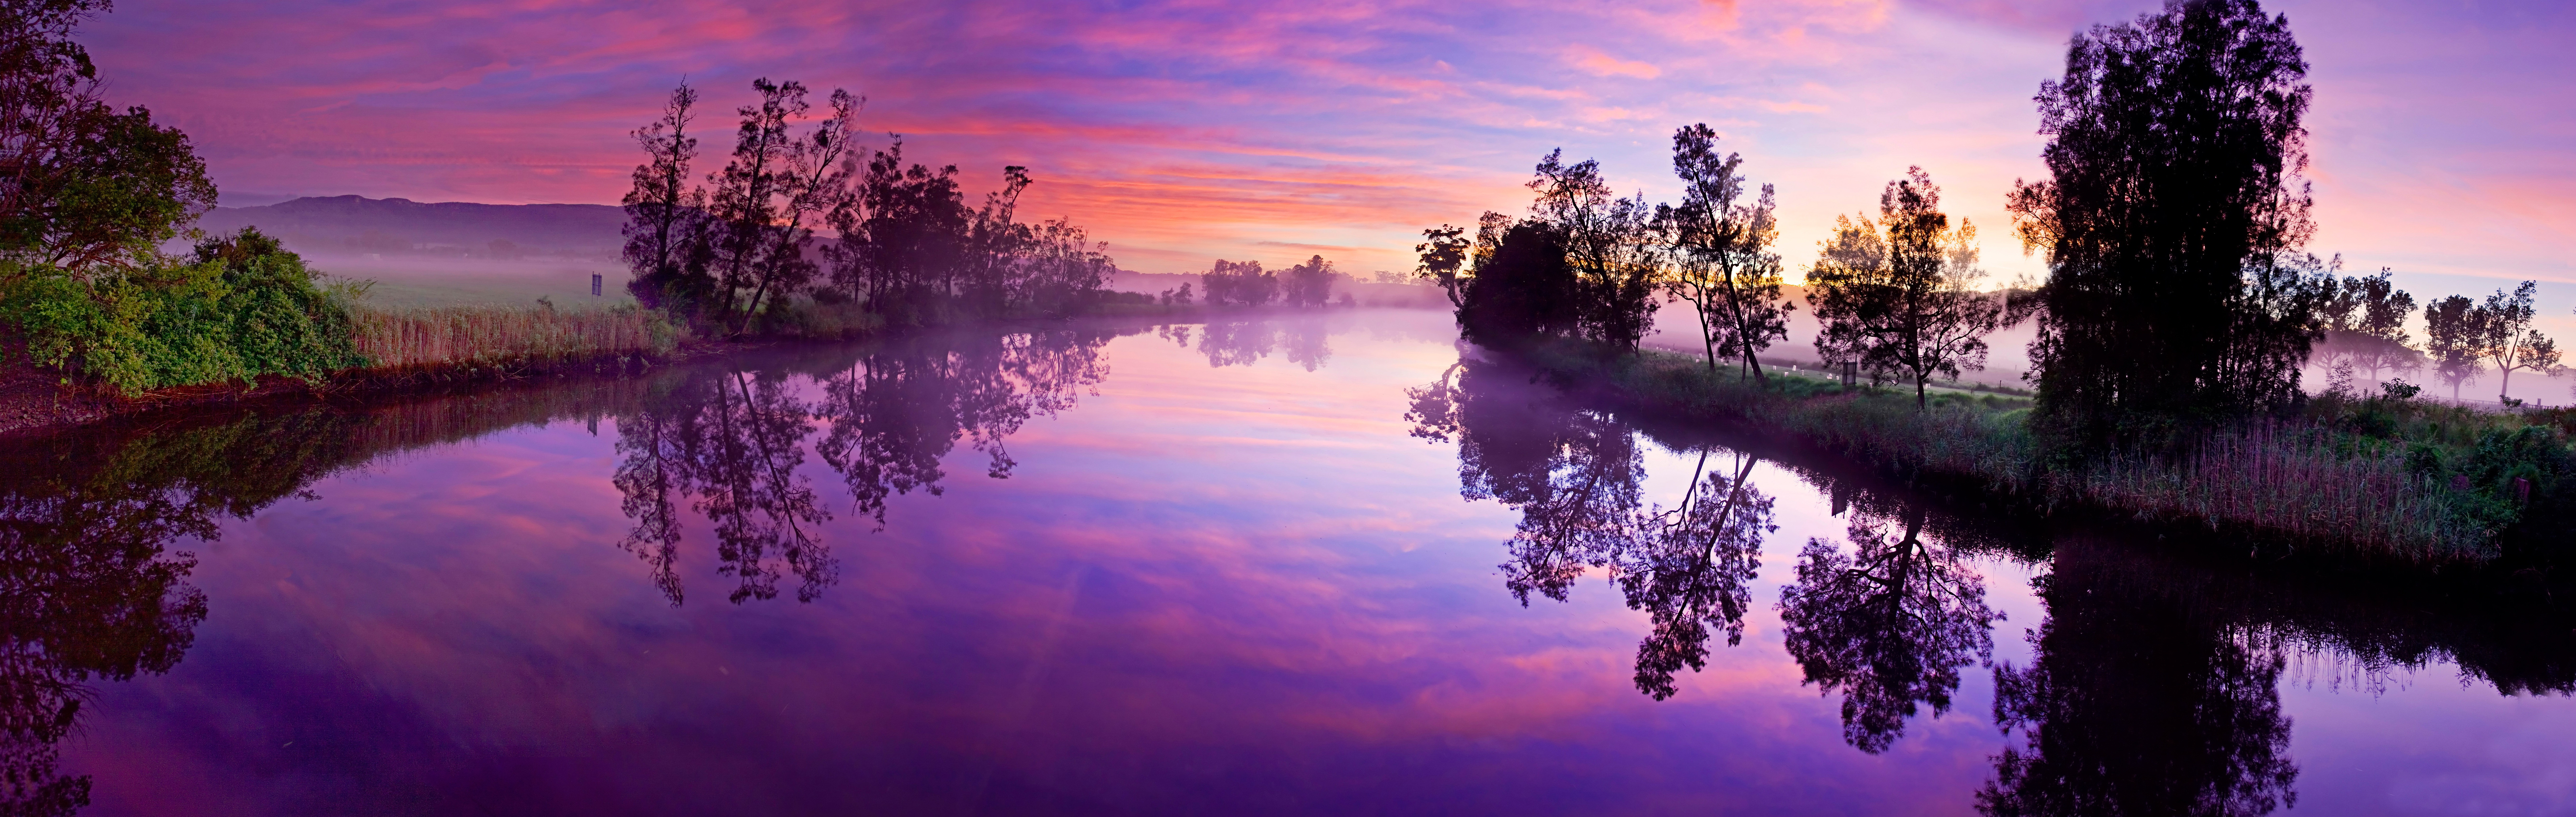 Nature Landscape Lake Agnes Water Watermills Trees Sunset 10757x3410